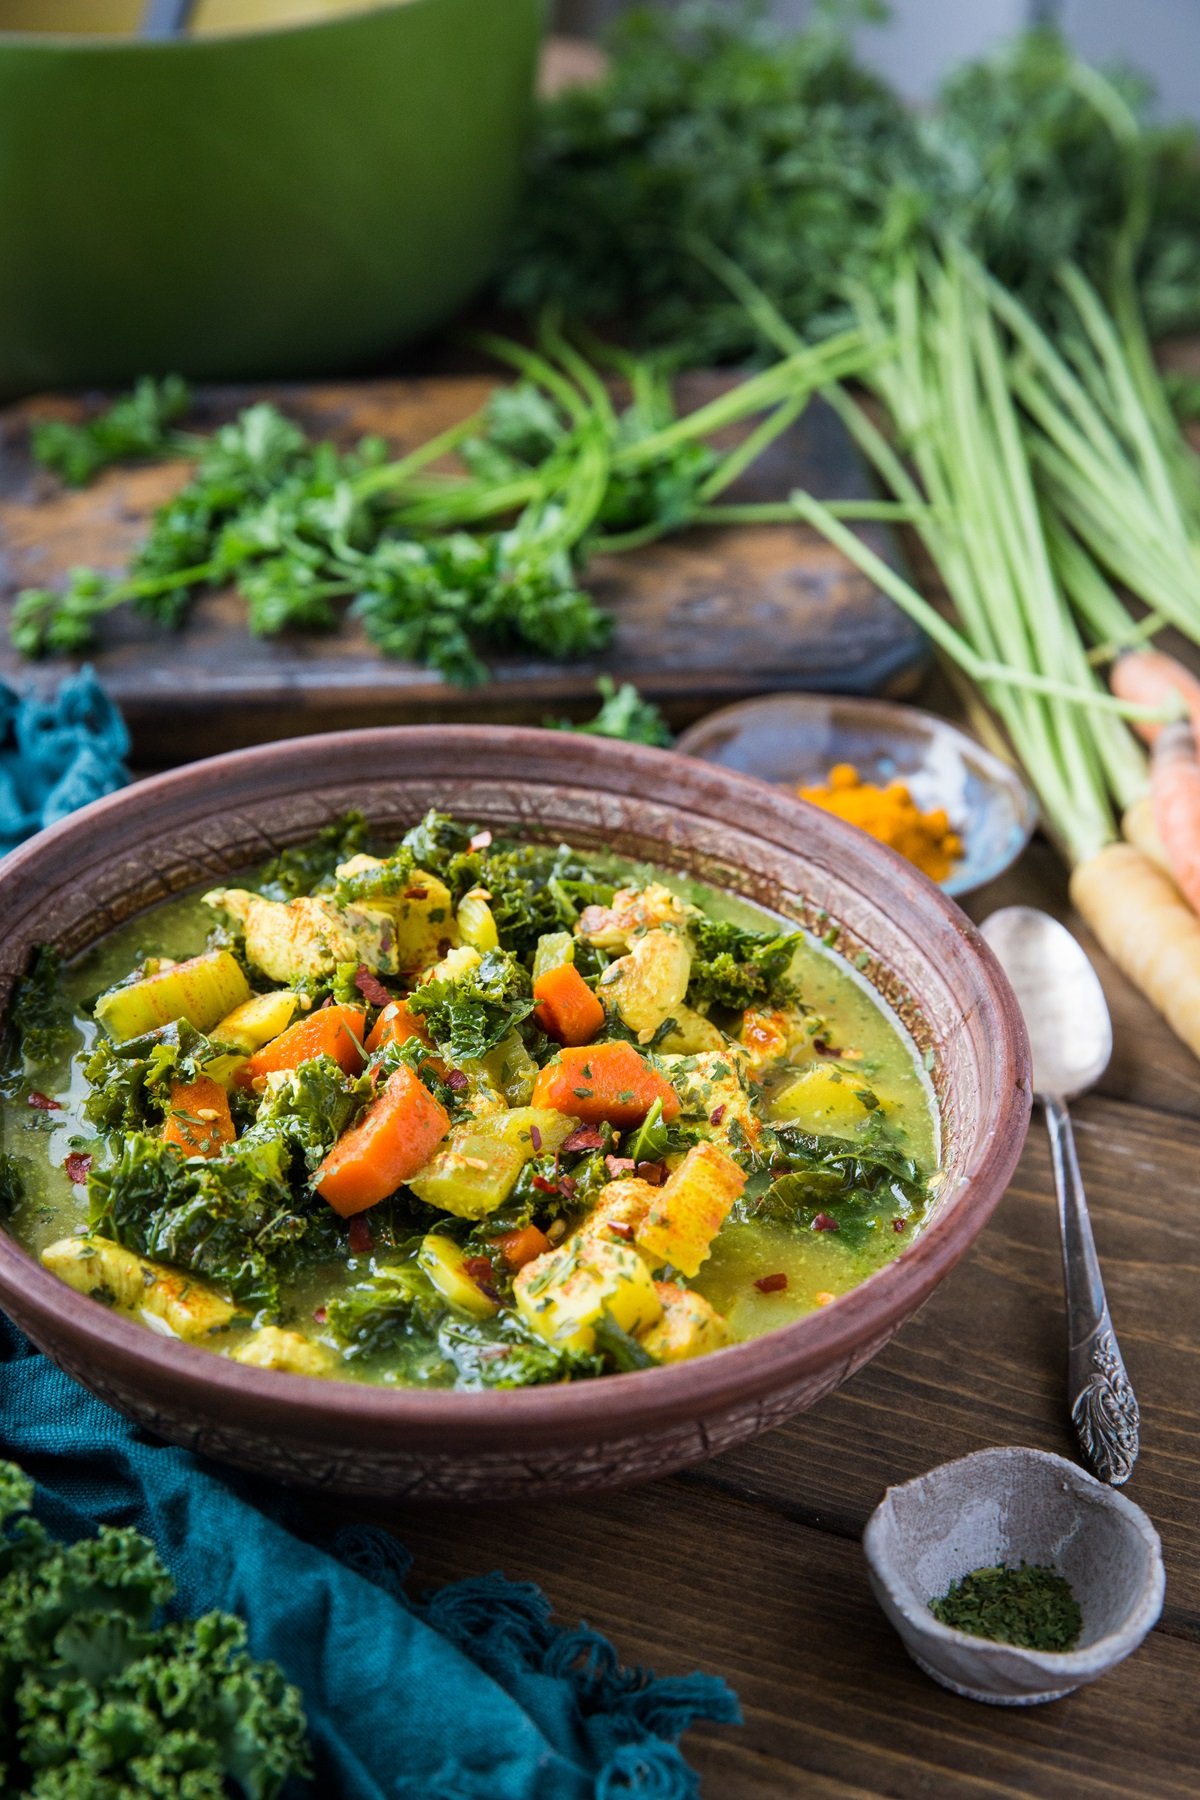 Superfood Immunity-Boosting Turmeric Chicken Soup with ginger, bone broth, kale, carrots, and parsley. This nutrient-dense meal is paleo, keto, and whole30 | TheRoastedRoot.com #glutenfree